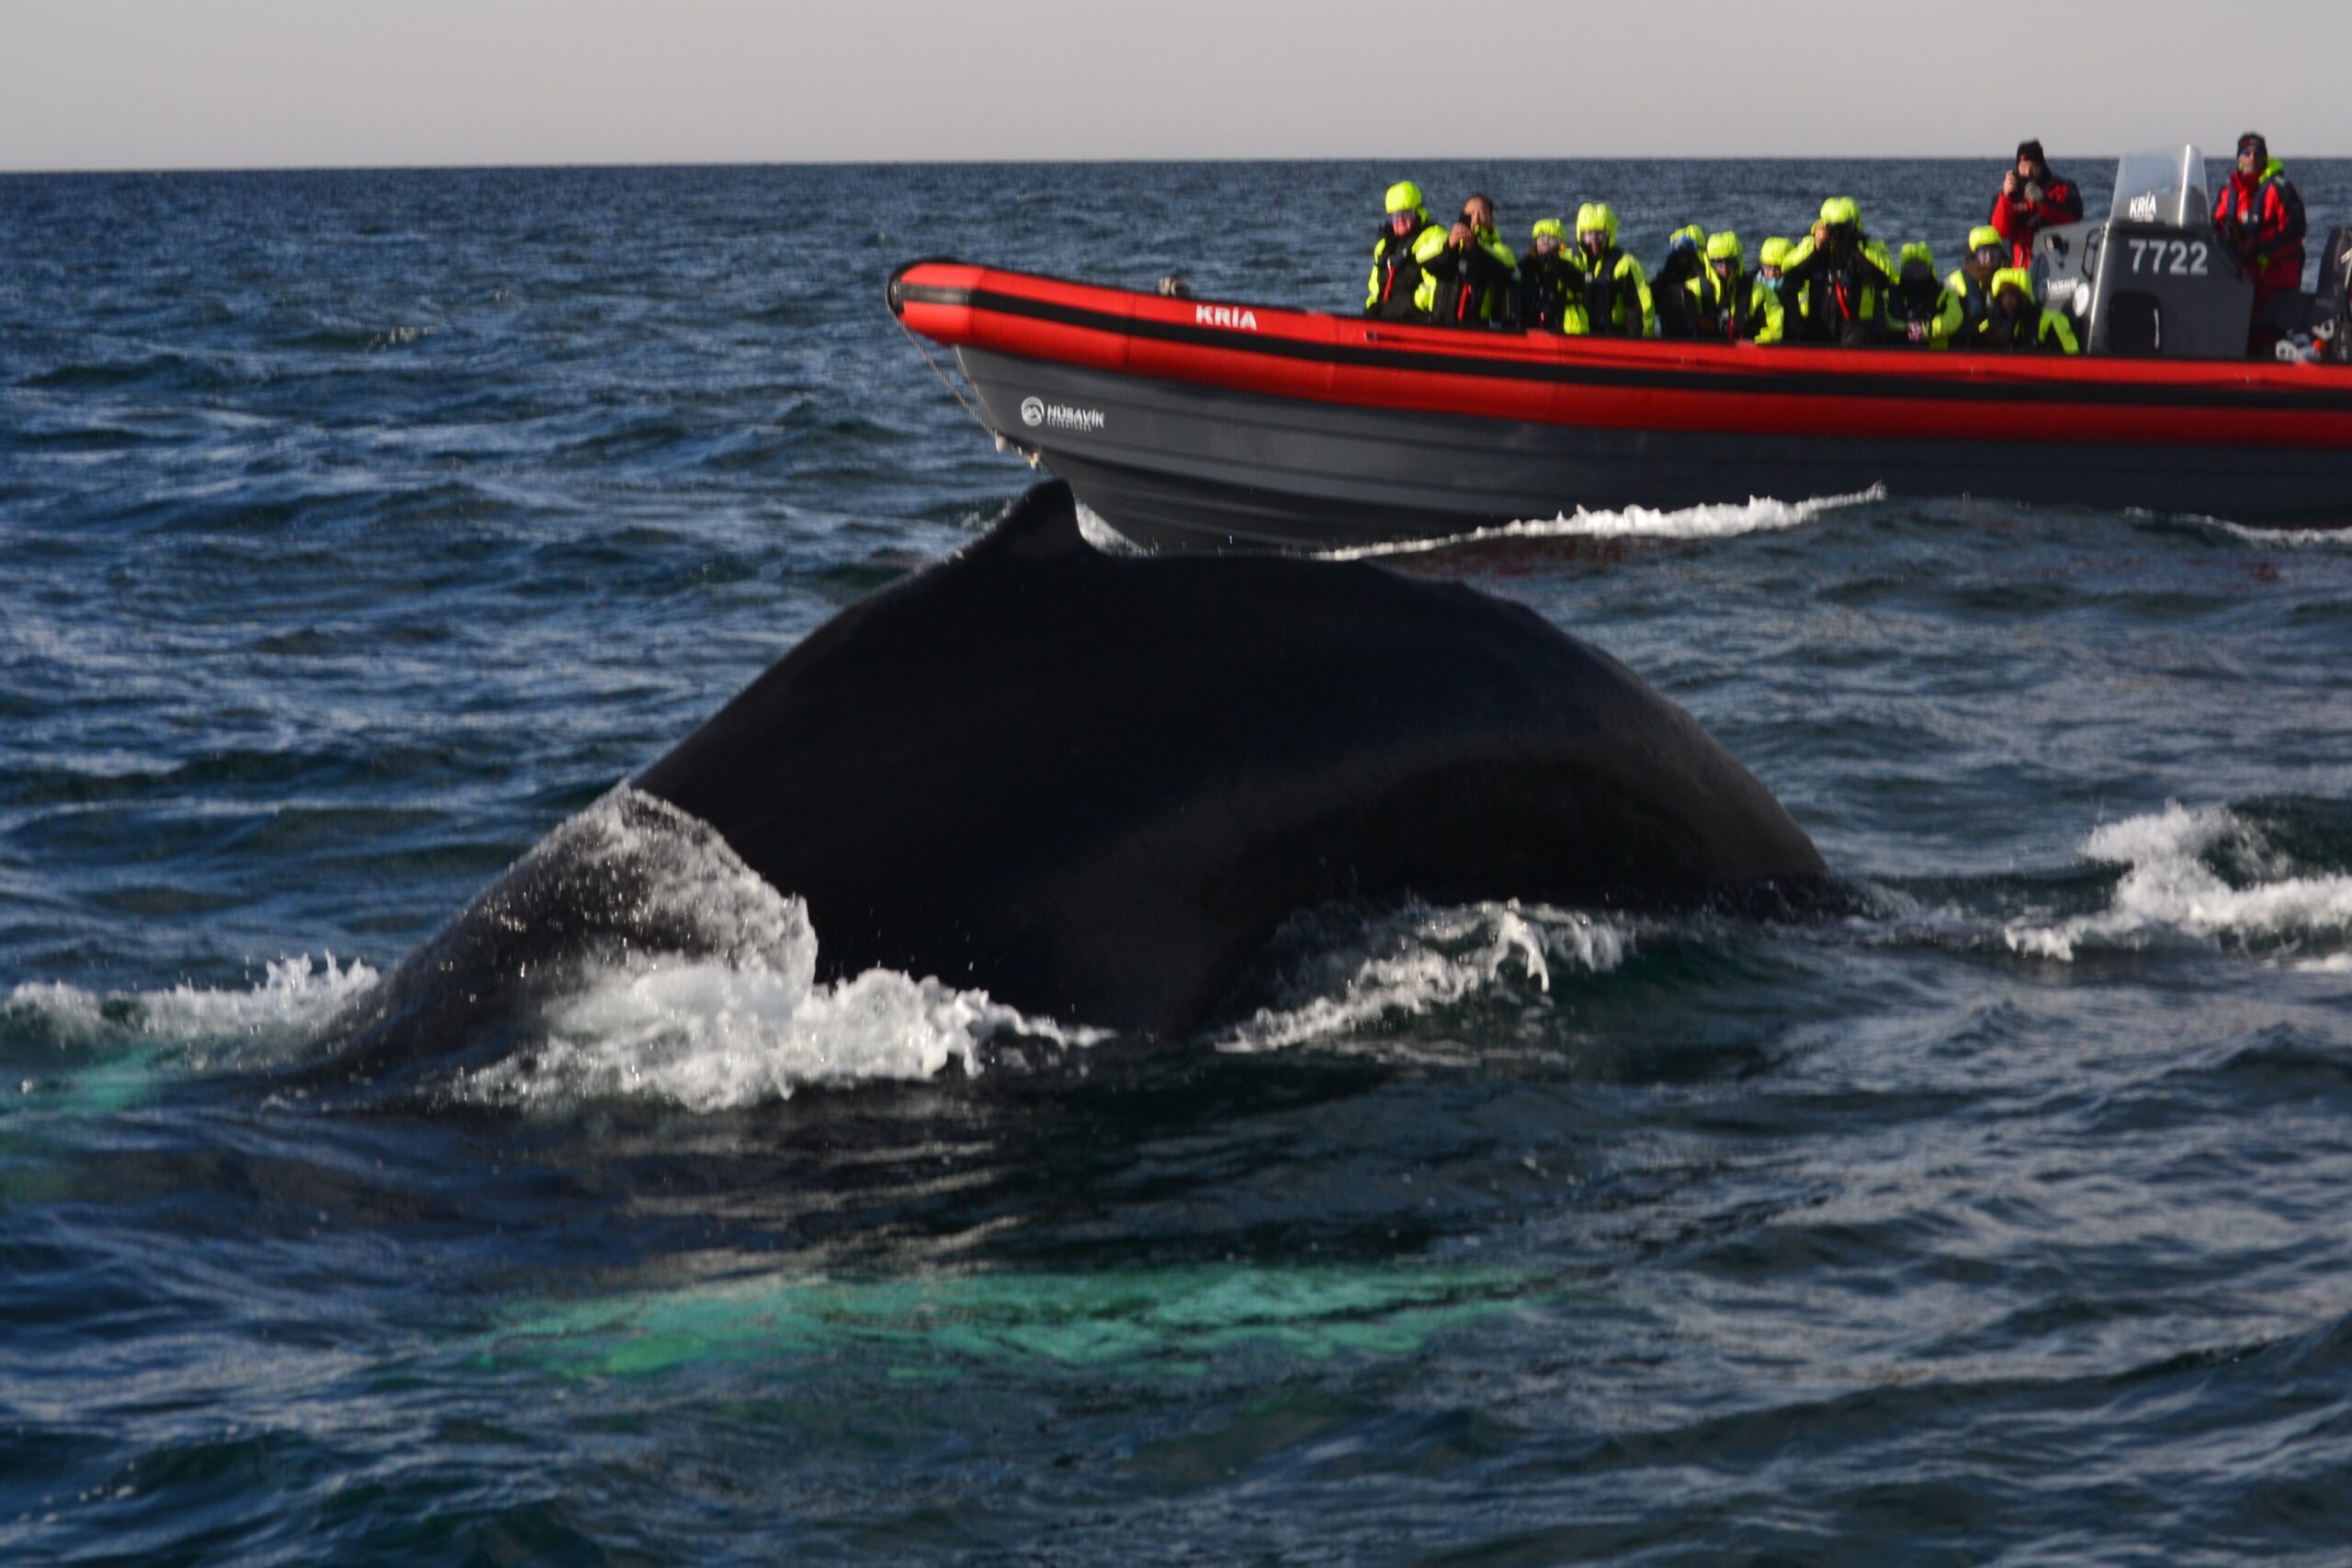 An orca whale crests the frigid water near whale watchers in a Zodiac. Icelandic Adventure - Collette Travel